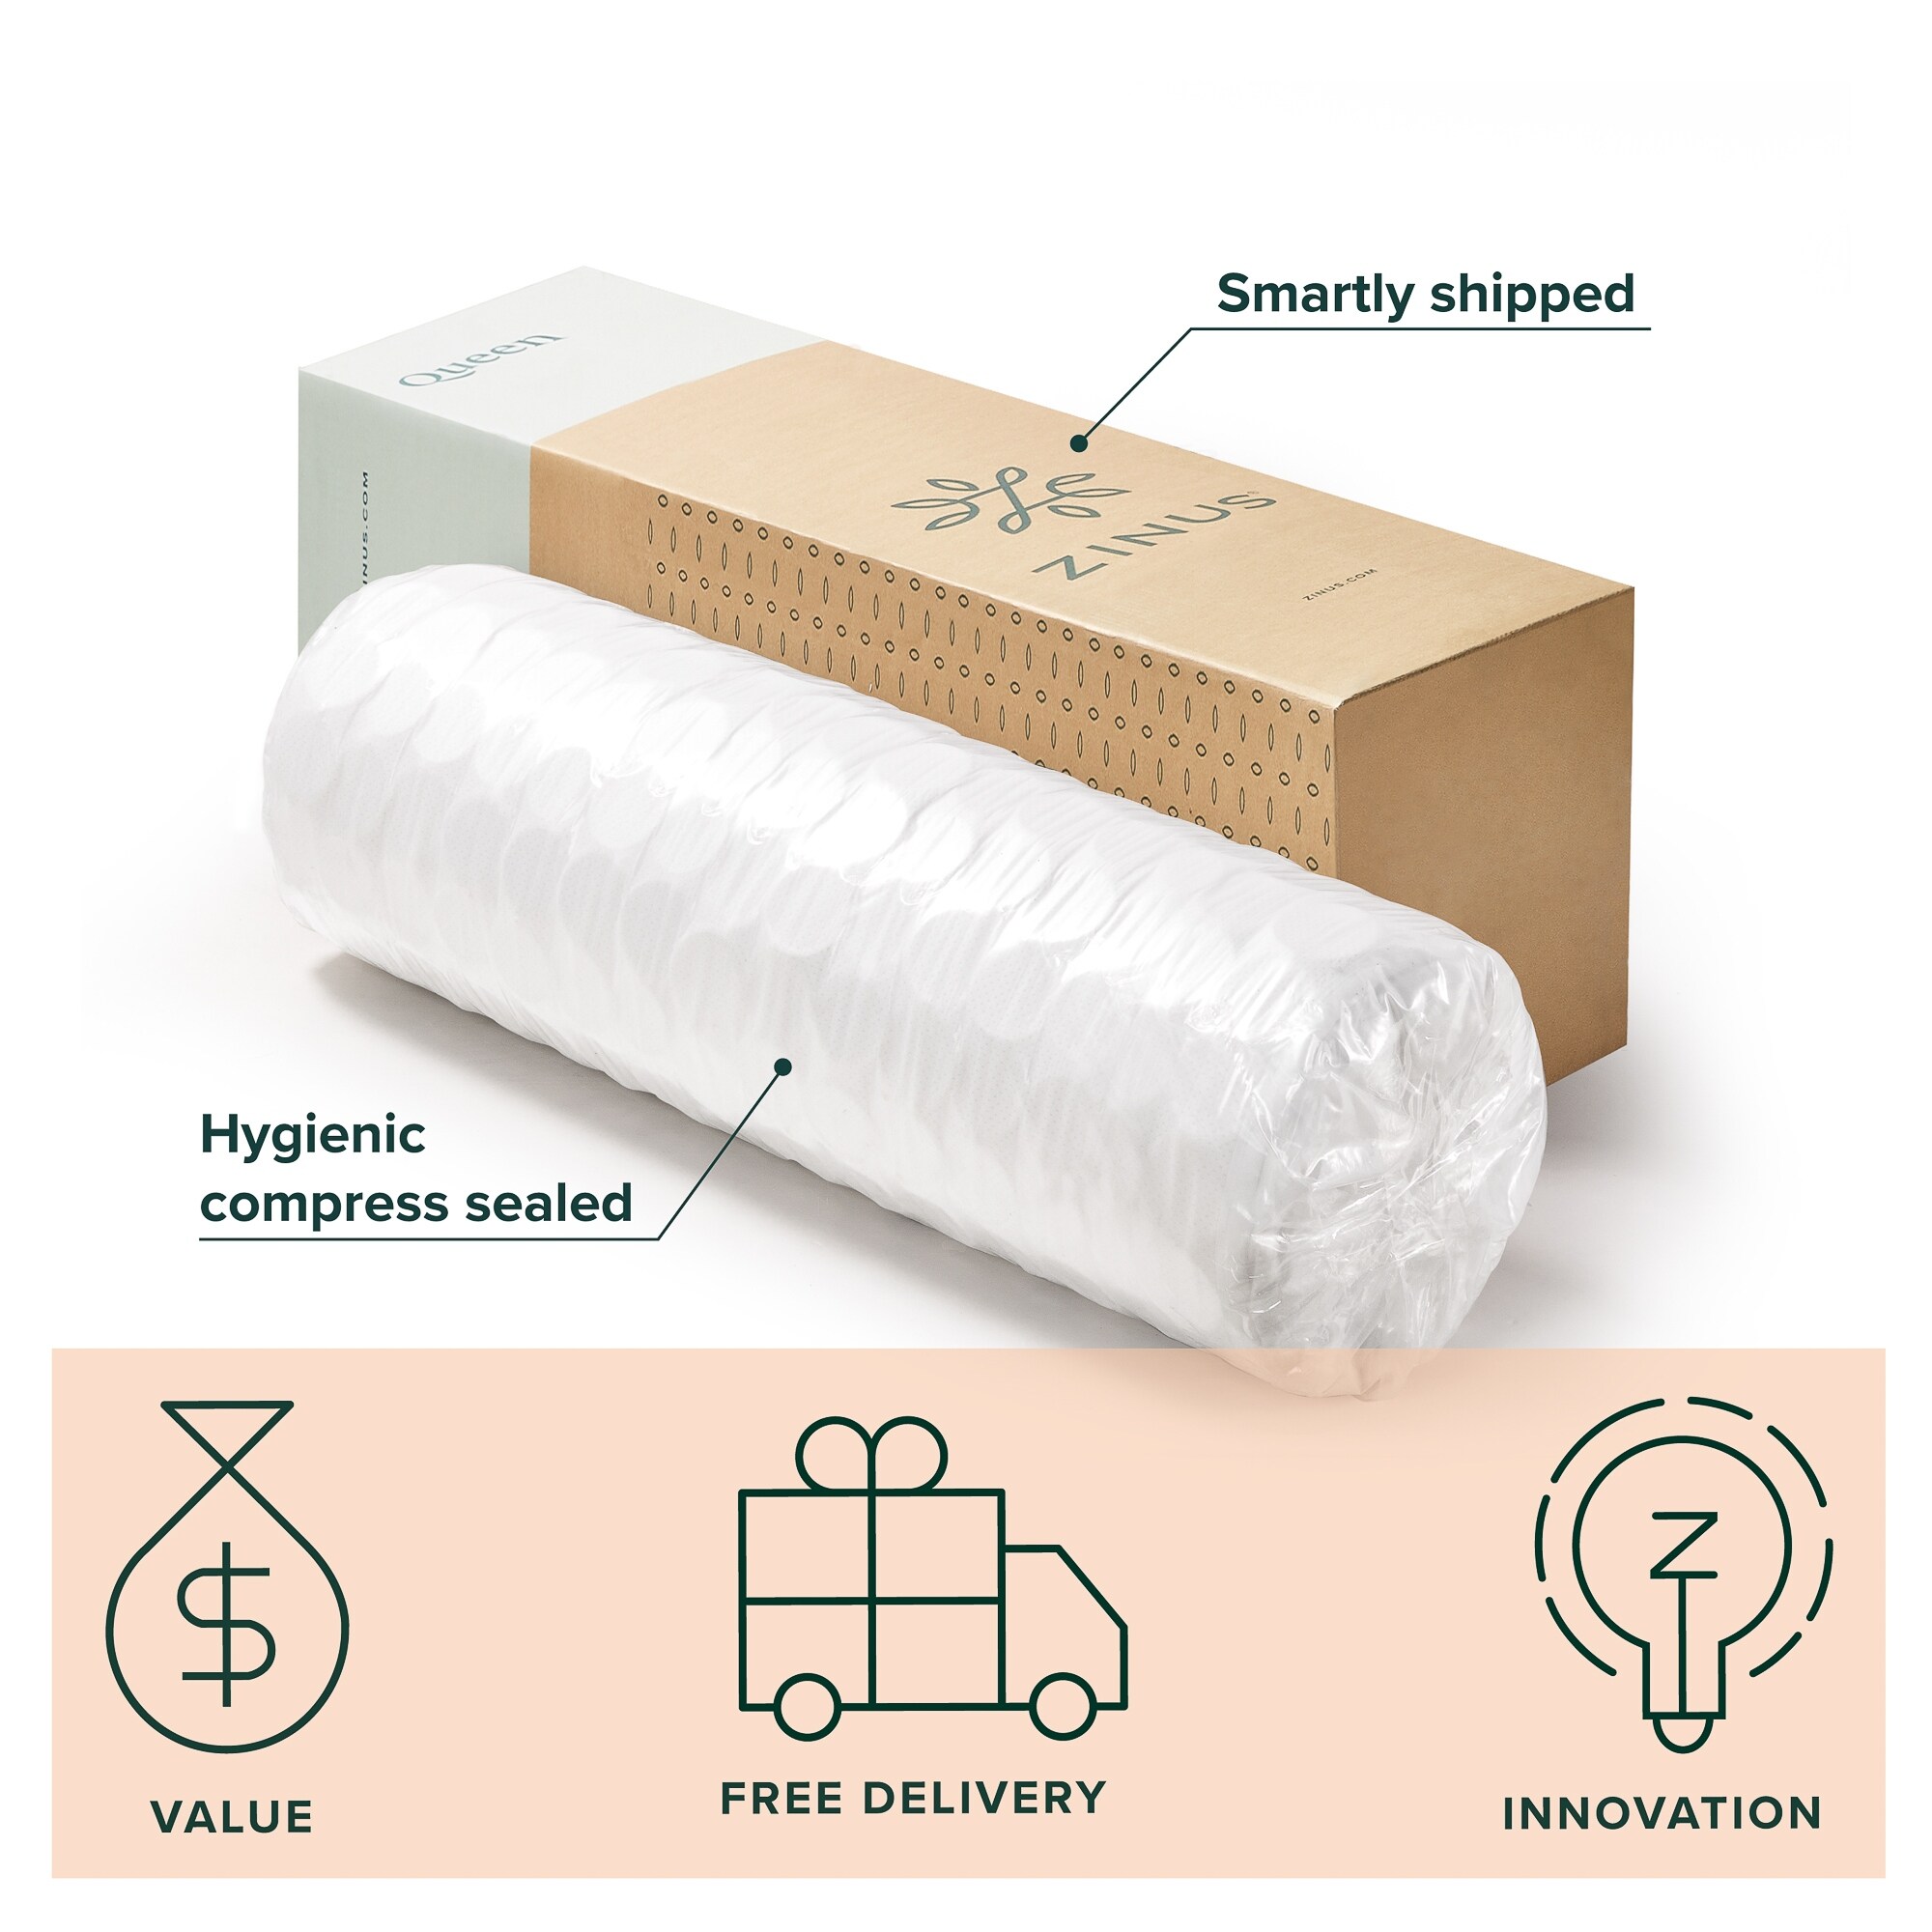 Priage by ZINUS 12-inch Cool Touch Comfort Gel-infused Hybrid Mattress